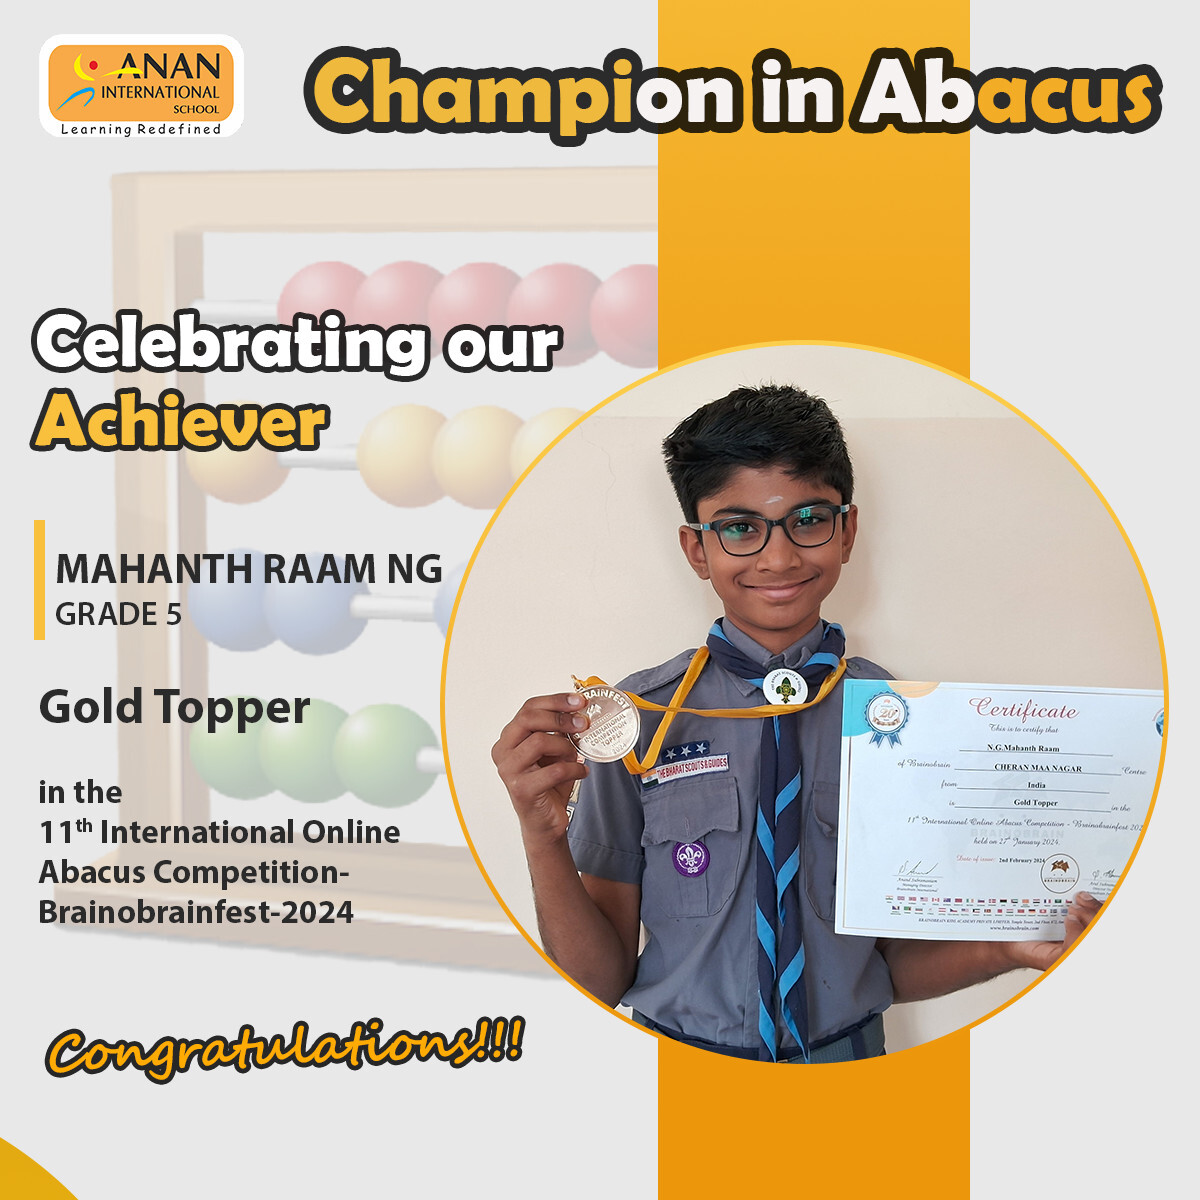 Recognizing and honoring the #hardwork and #dedication of our #students who have excelled in #Abacus, #robotics, and #horseriding. #AnanInternationalSchool #inspiringyoungminds #achievement #achievers #winners #appreciationpost #toppers #champions